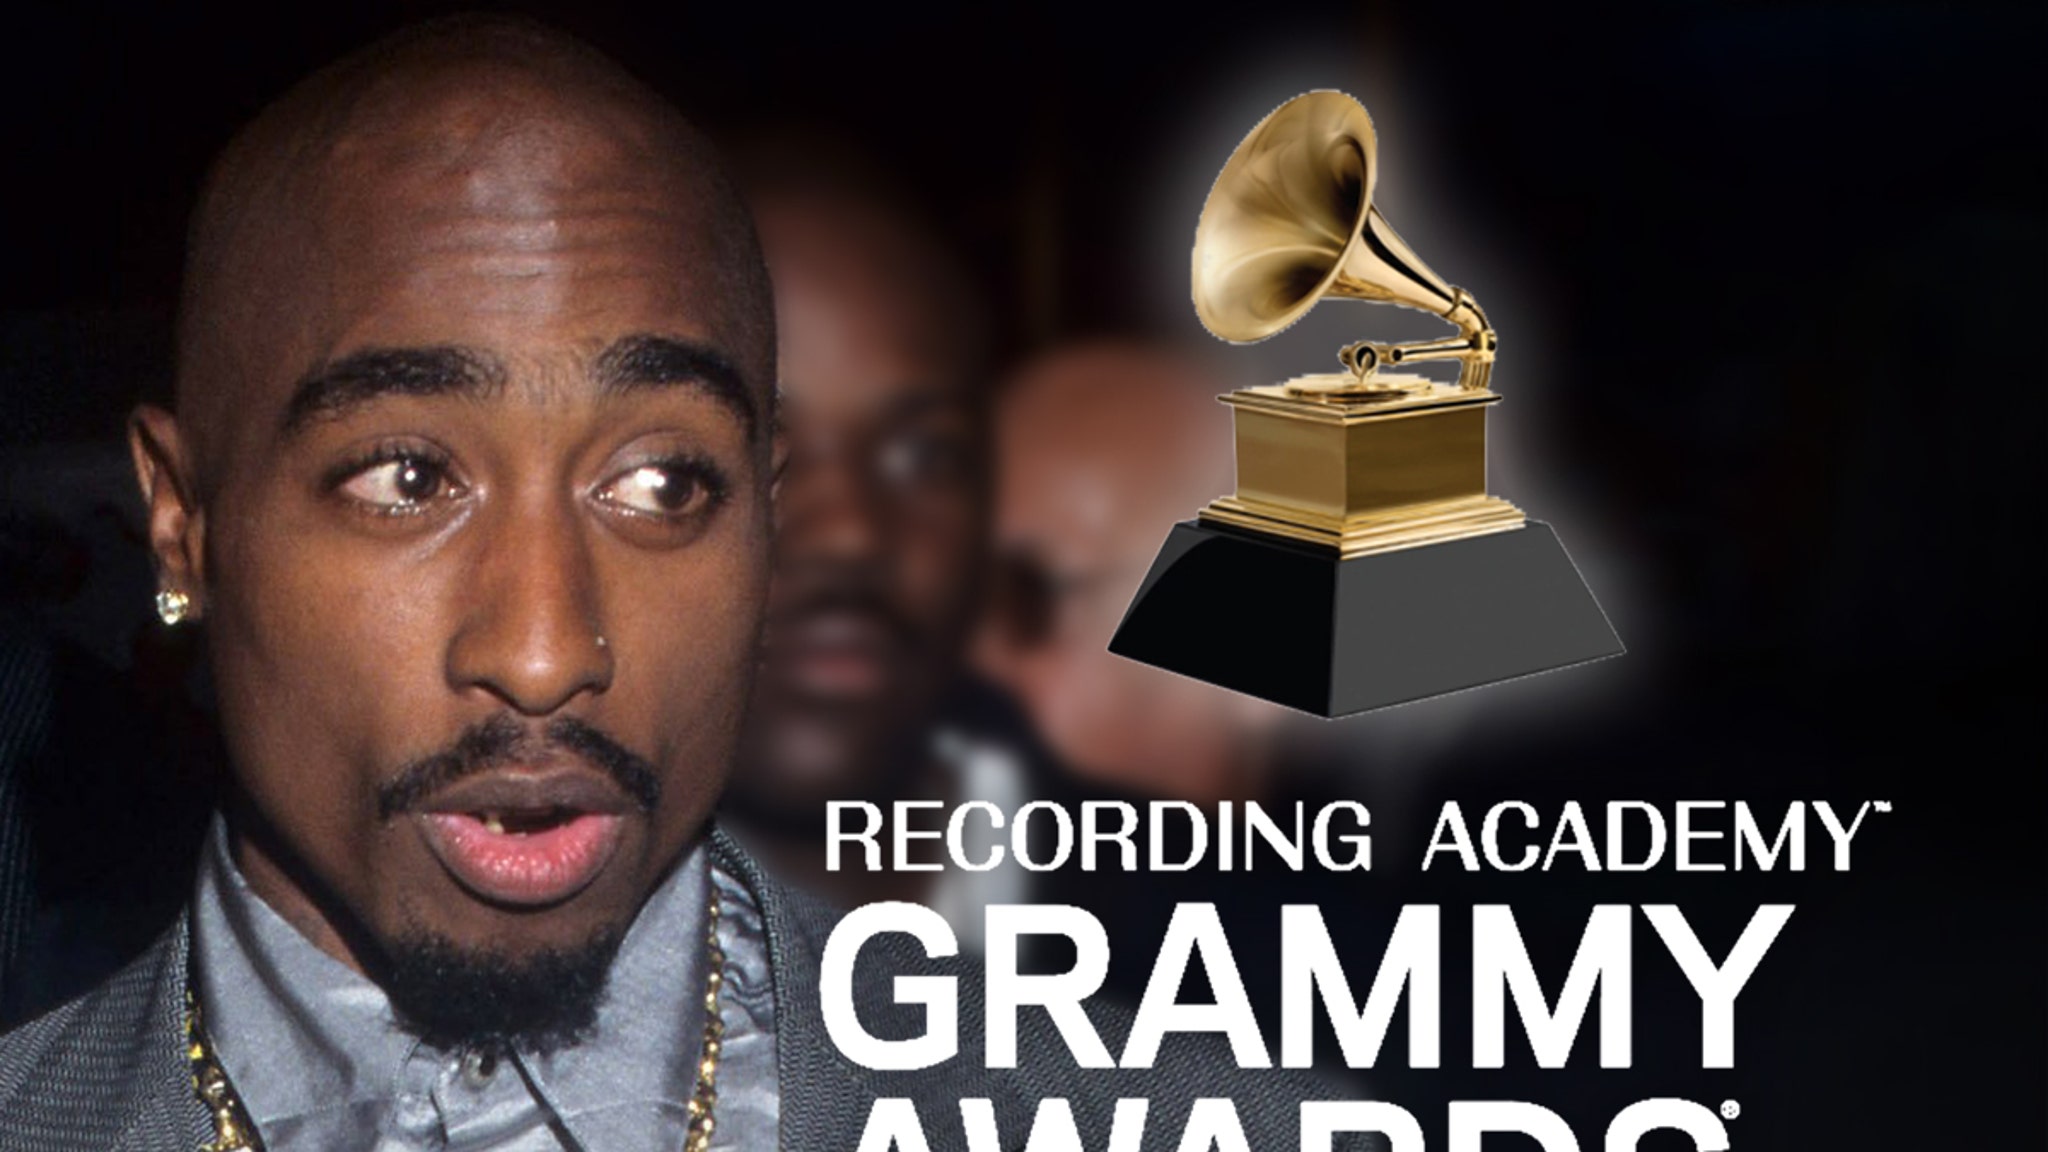 Tupac would be team week in Grammy drama, says brother